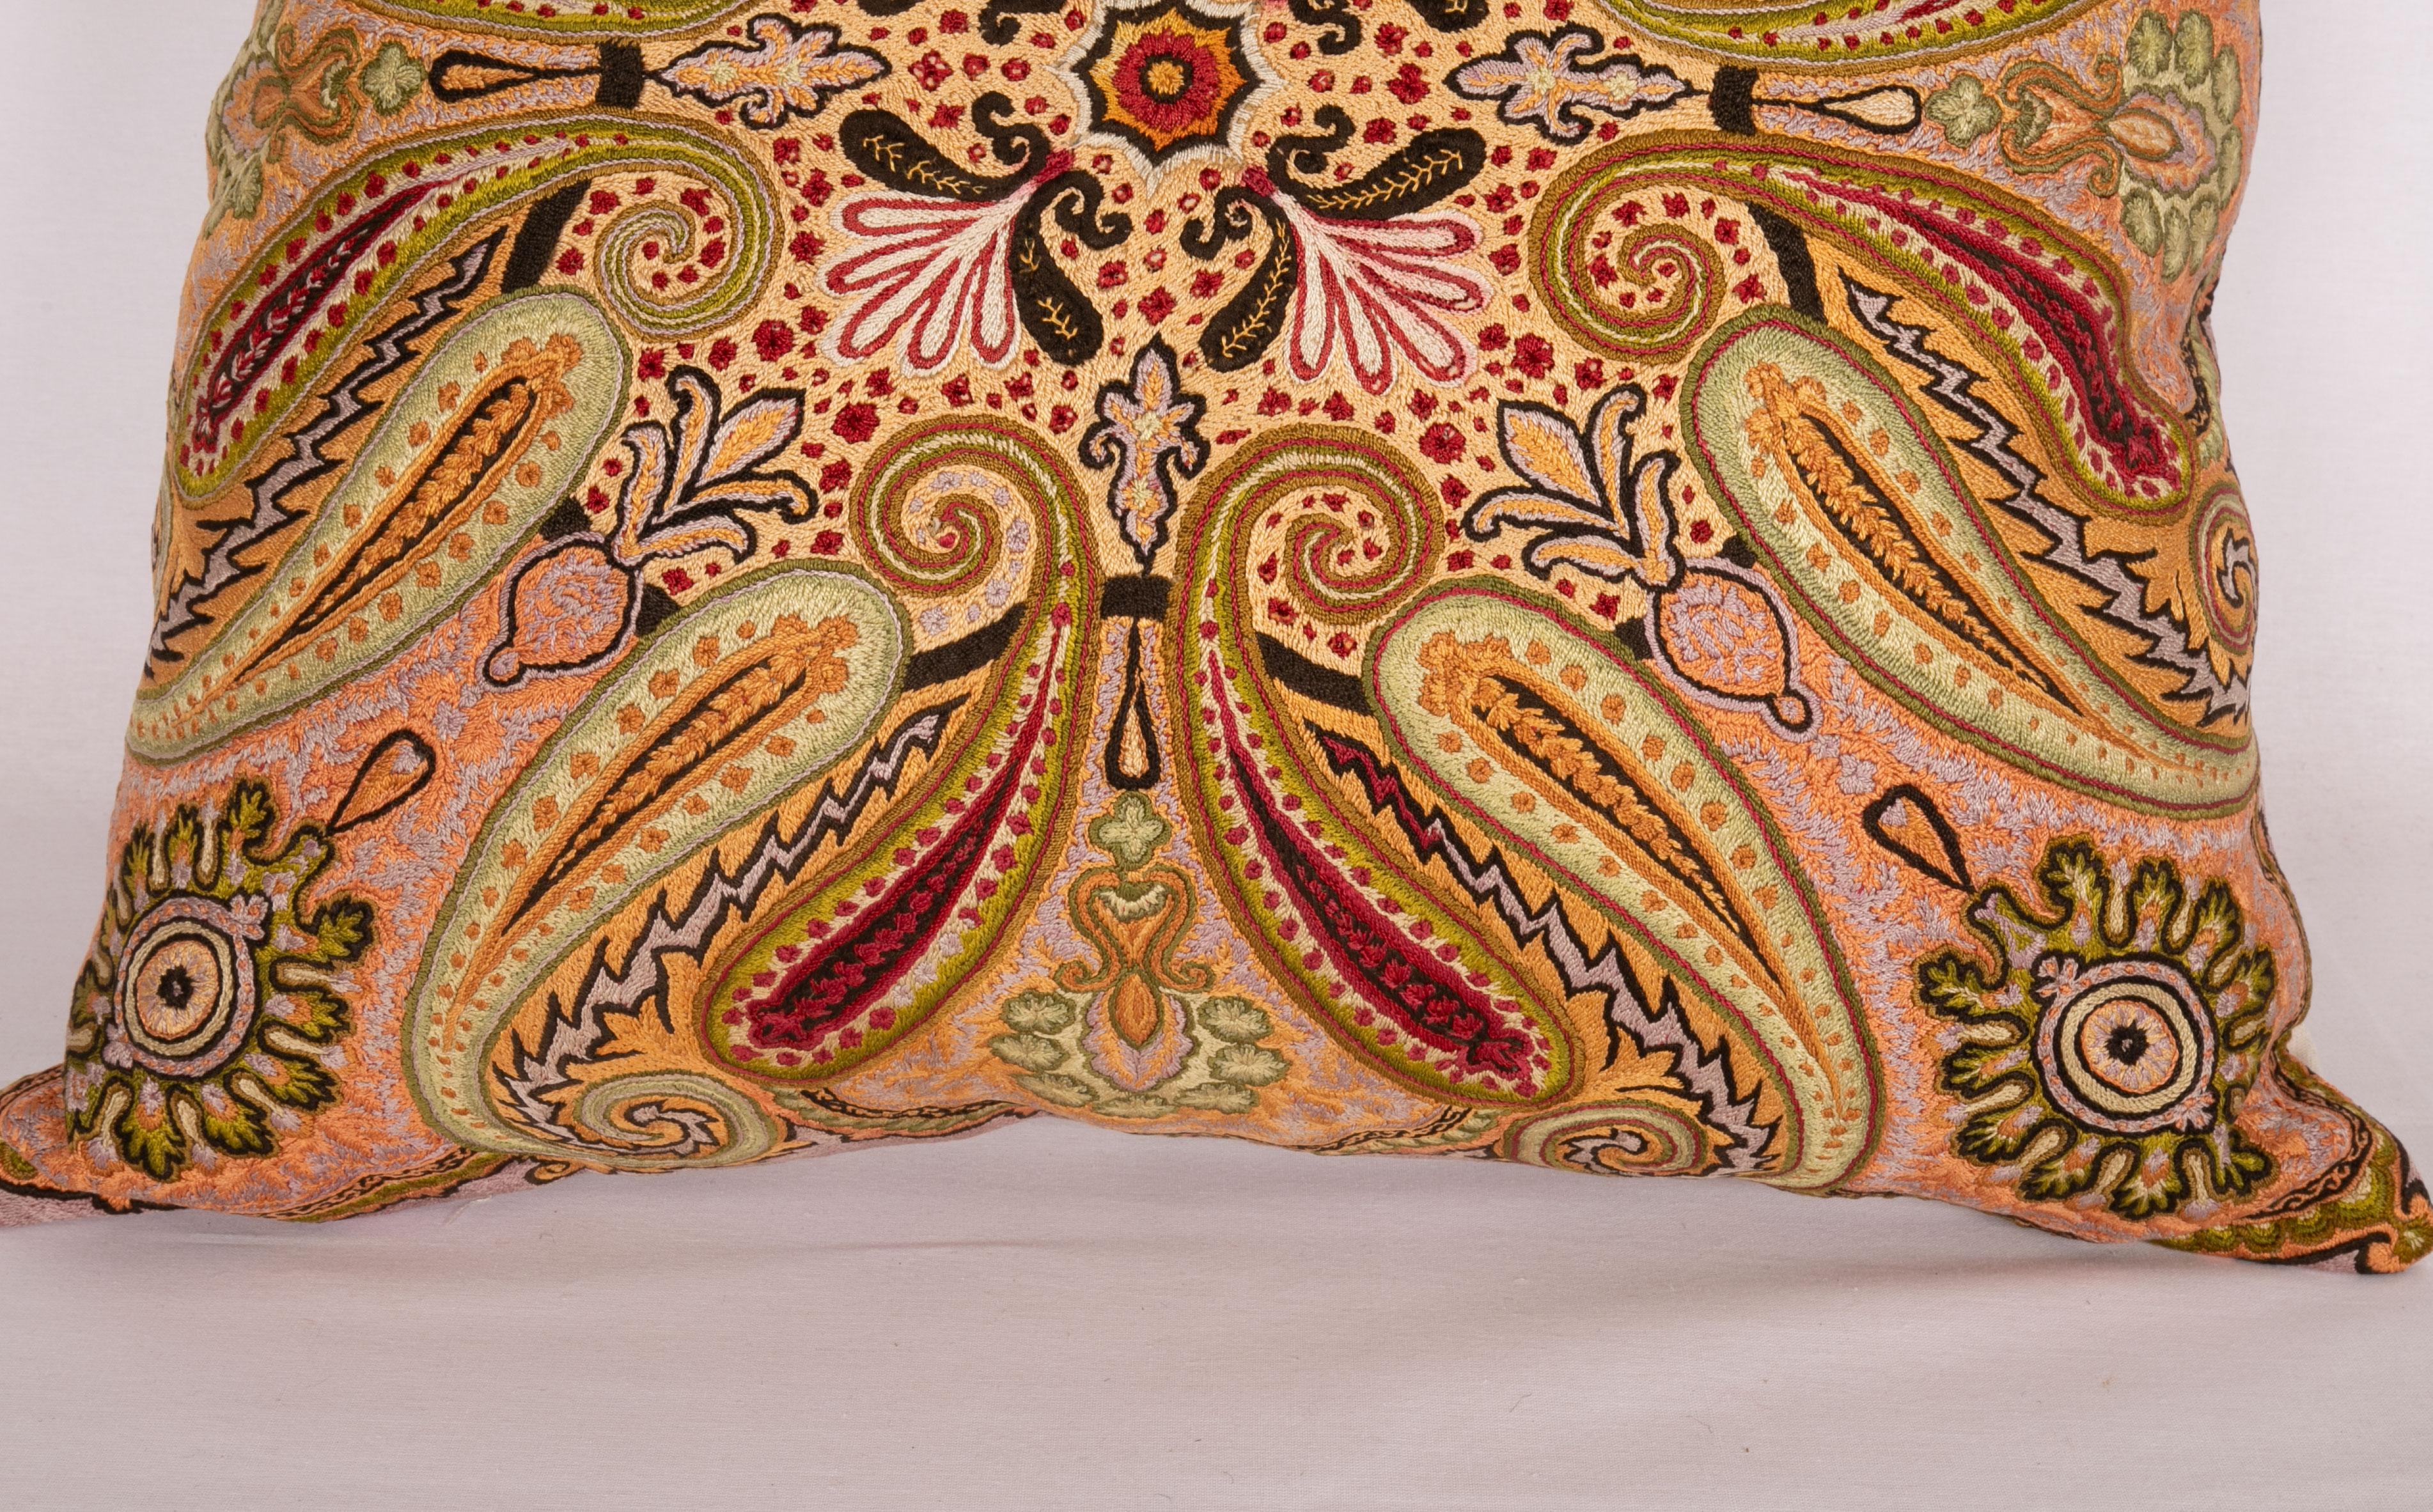 Embroidered Pillow Case Made from a Vintage Indian Embroidery